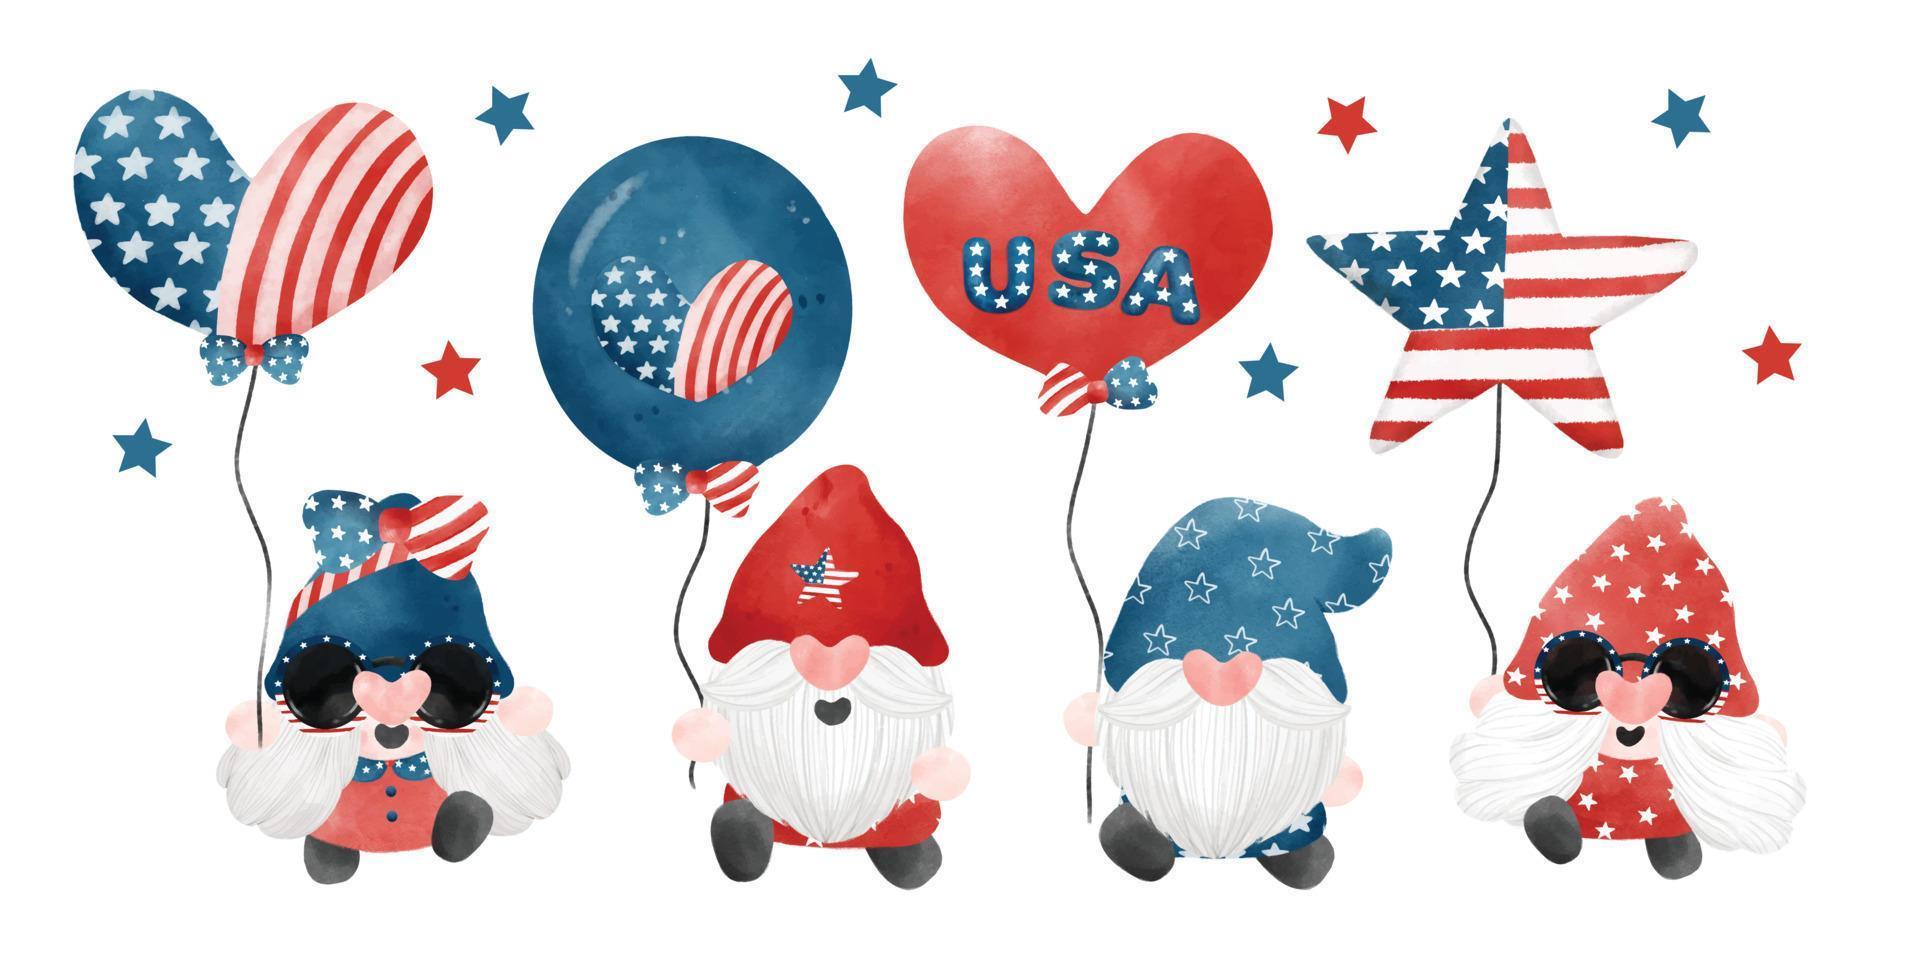 group of 4th of July Gnome Patriotic holding festive balloons America Independence day cartoon watercolor illustration vector